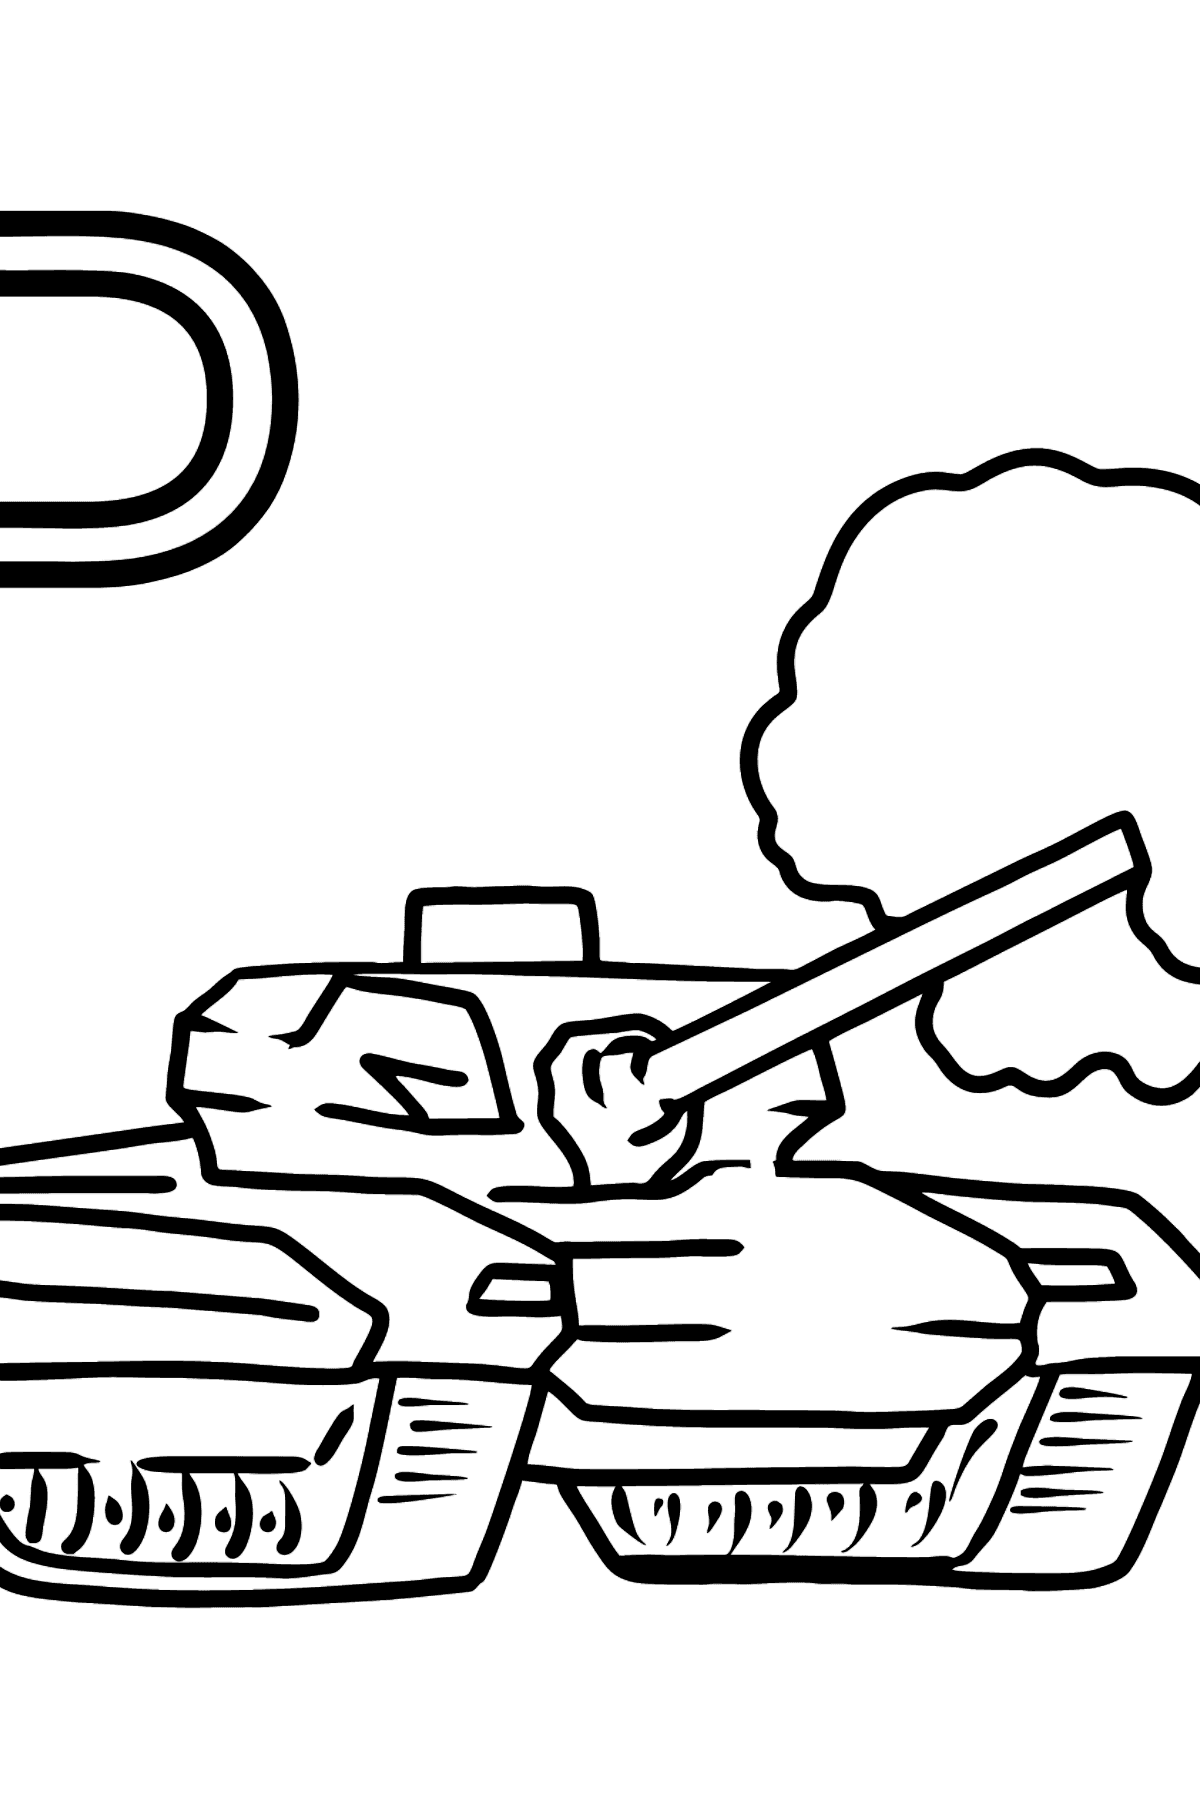 German Letter P coloring pages - PANZER - Coloring Pages for Kids